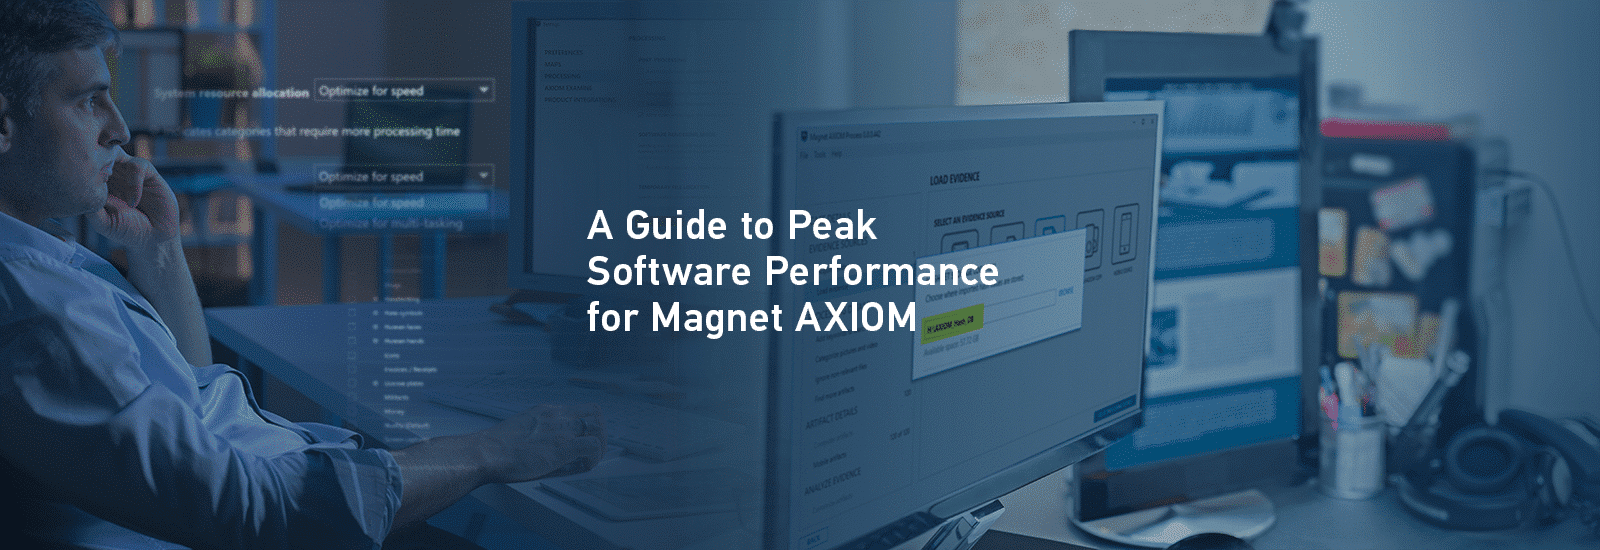 A decorative header for the "Peak Software Performance in Magnet AXIOM" post